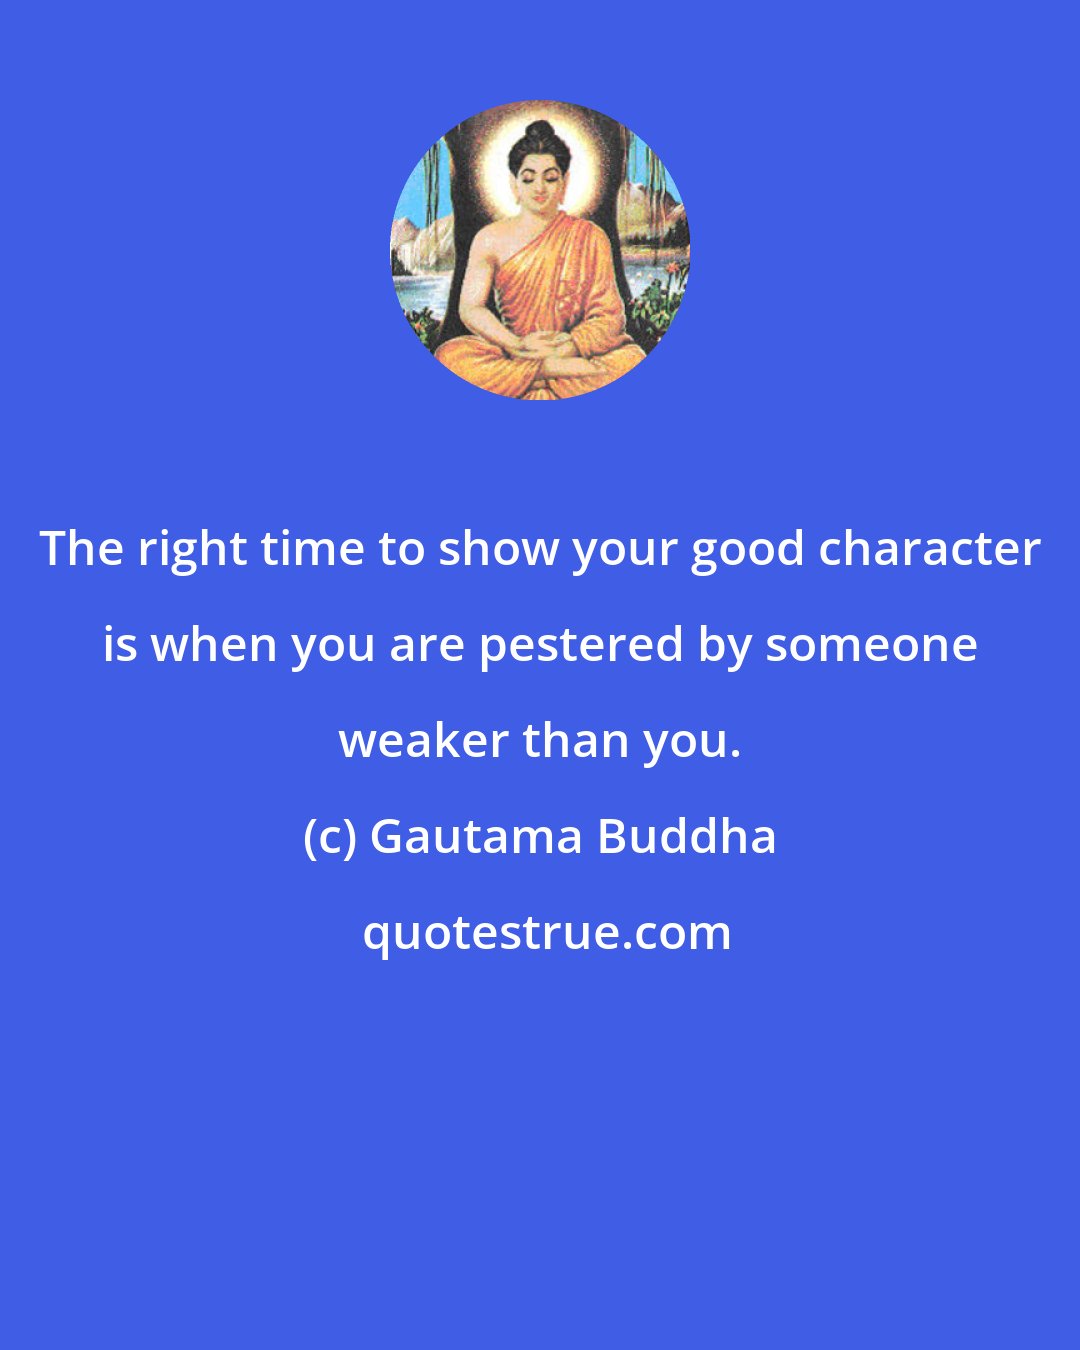 Gautama Buddha: The right time to show your good character is when you are pestered by someone weaker than you.